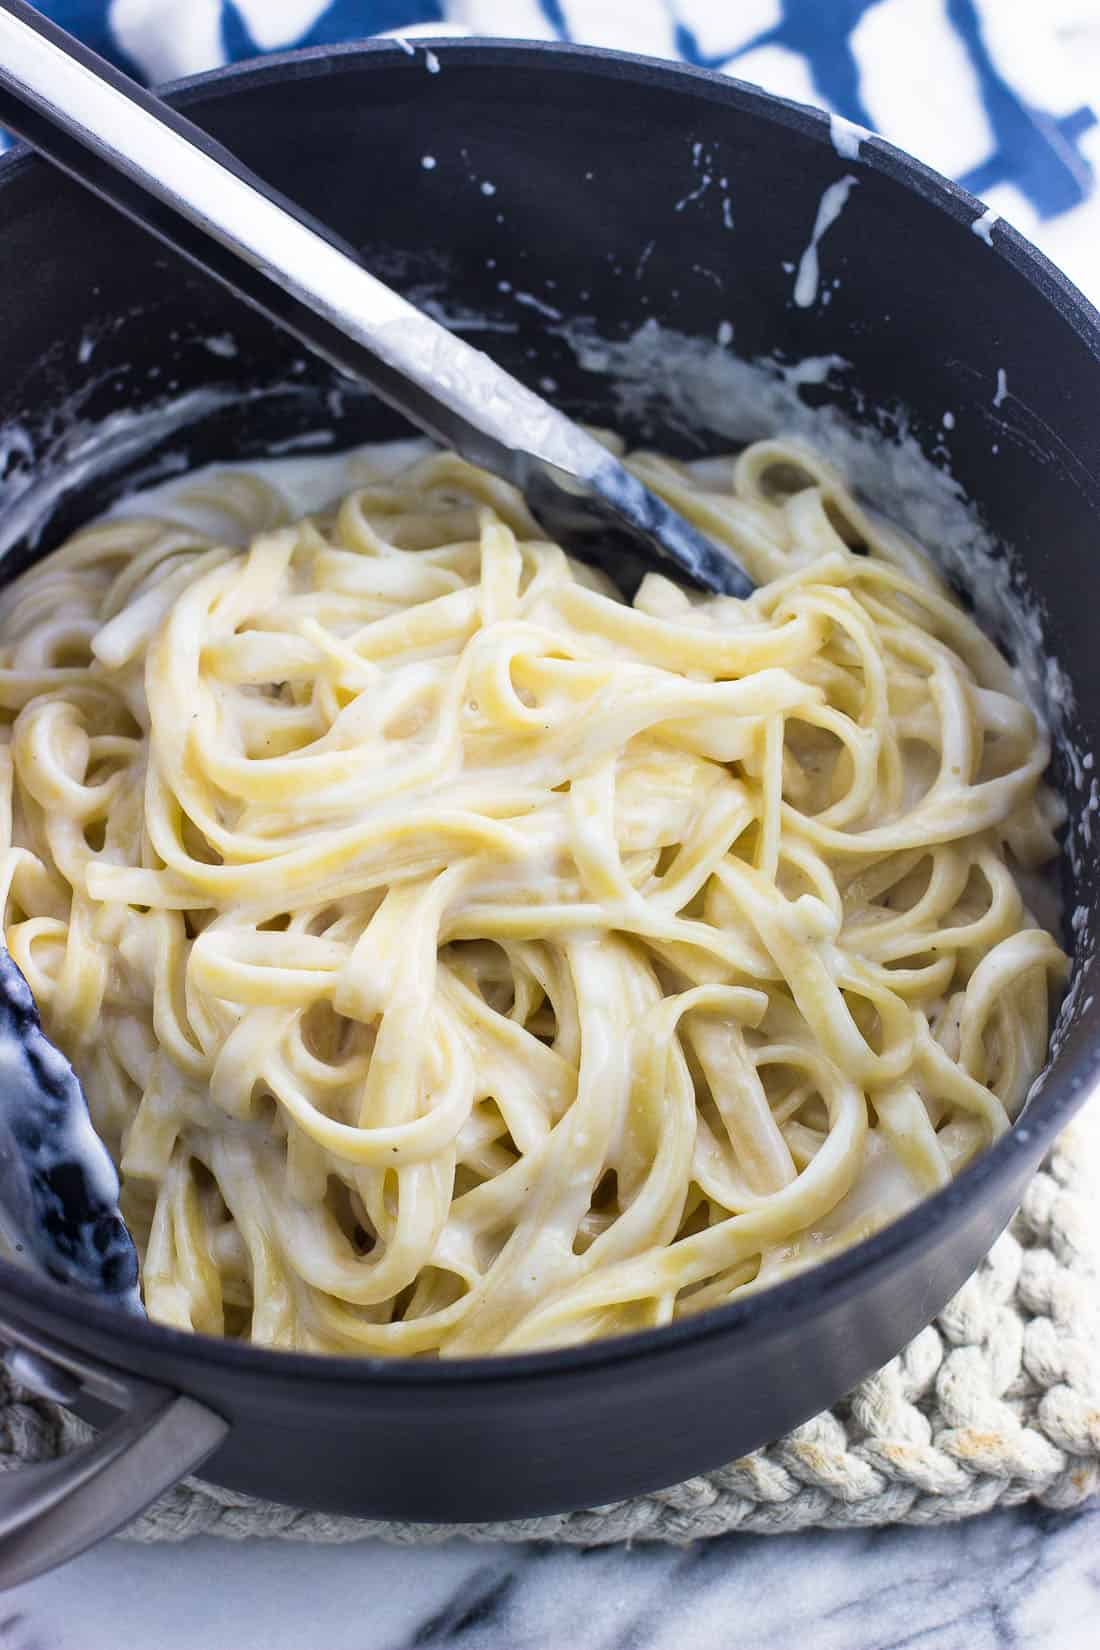 Fettuccine being tossed in alfredo sauce with tongs.